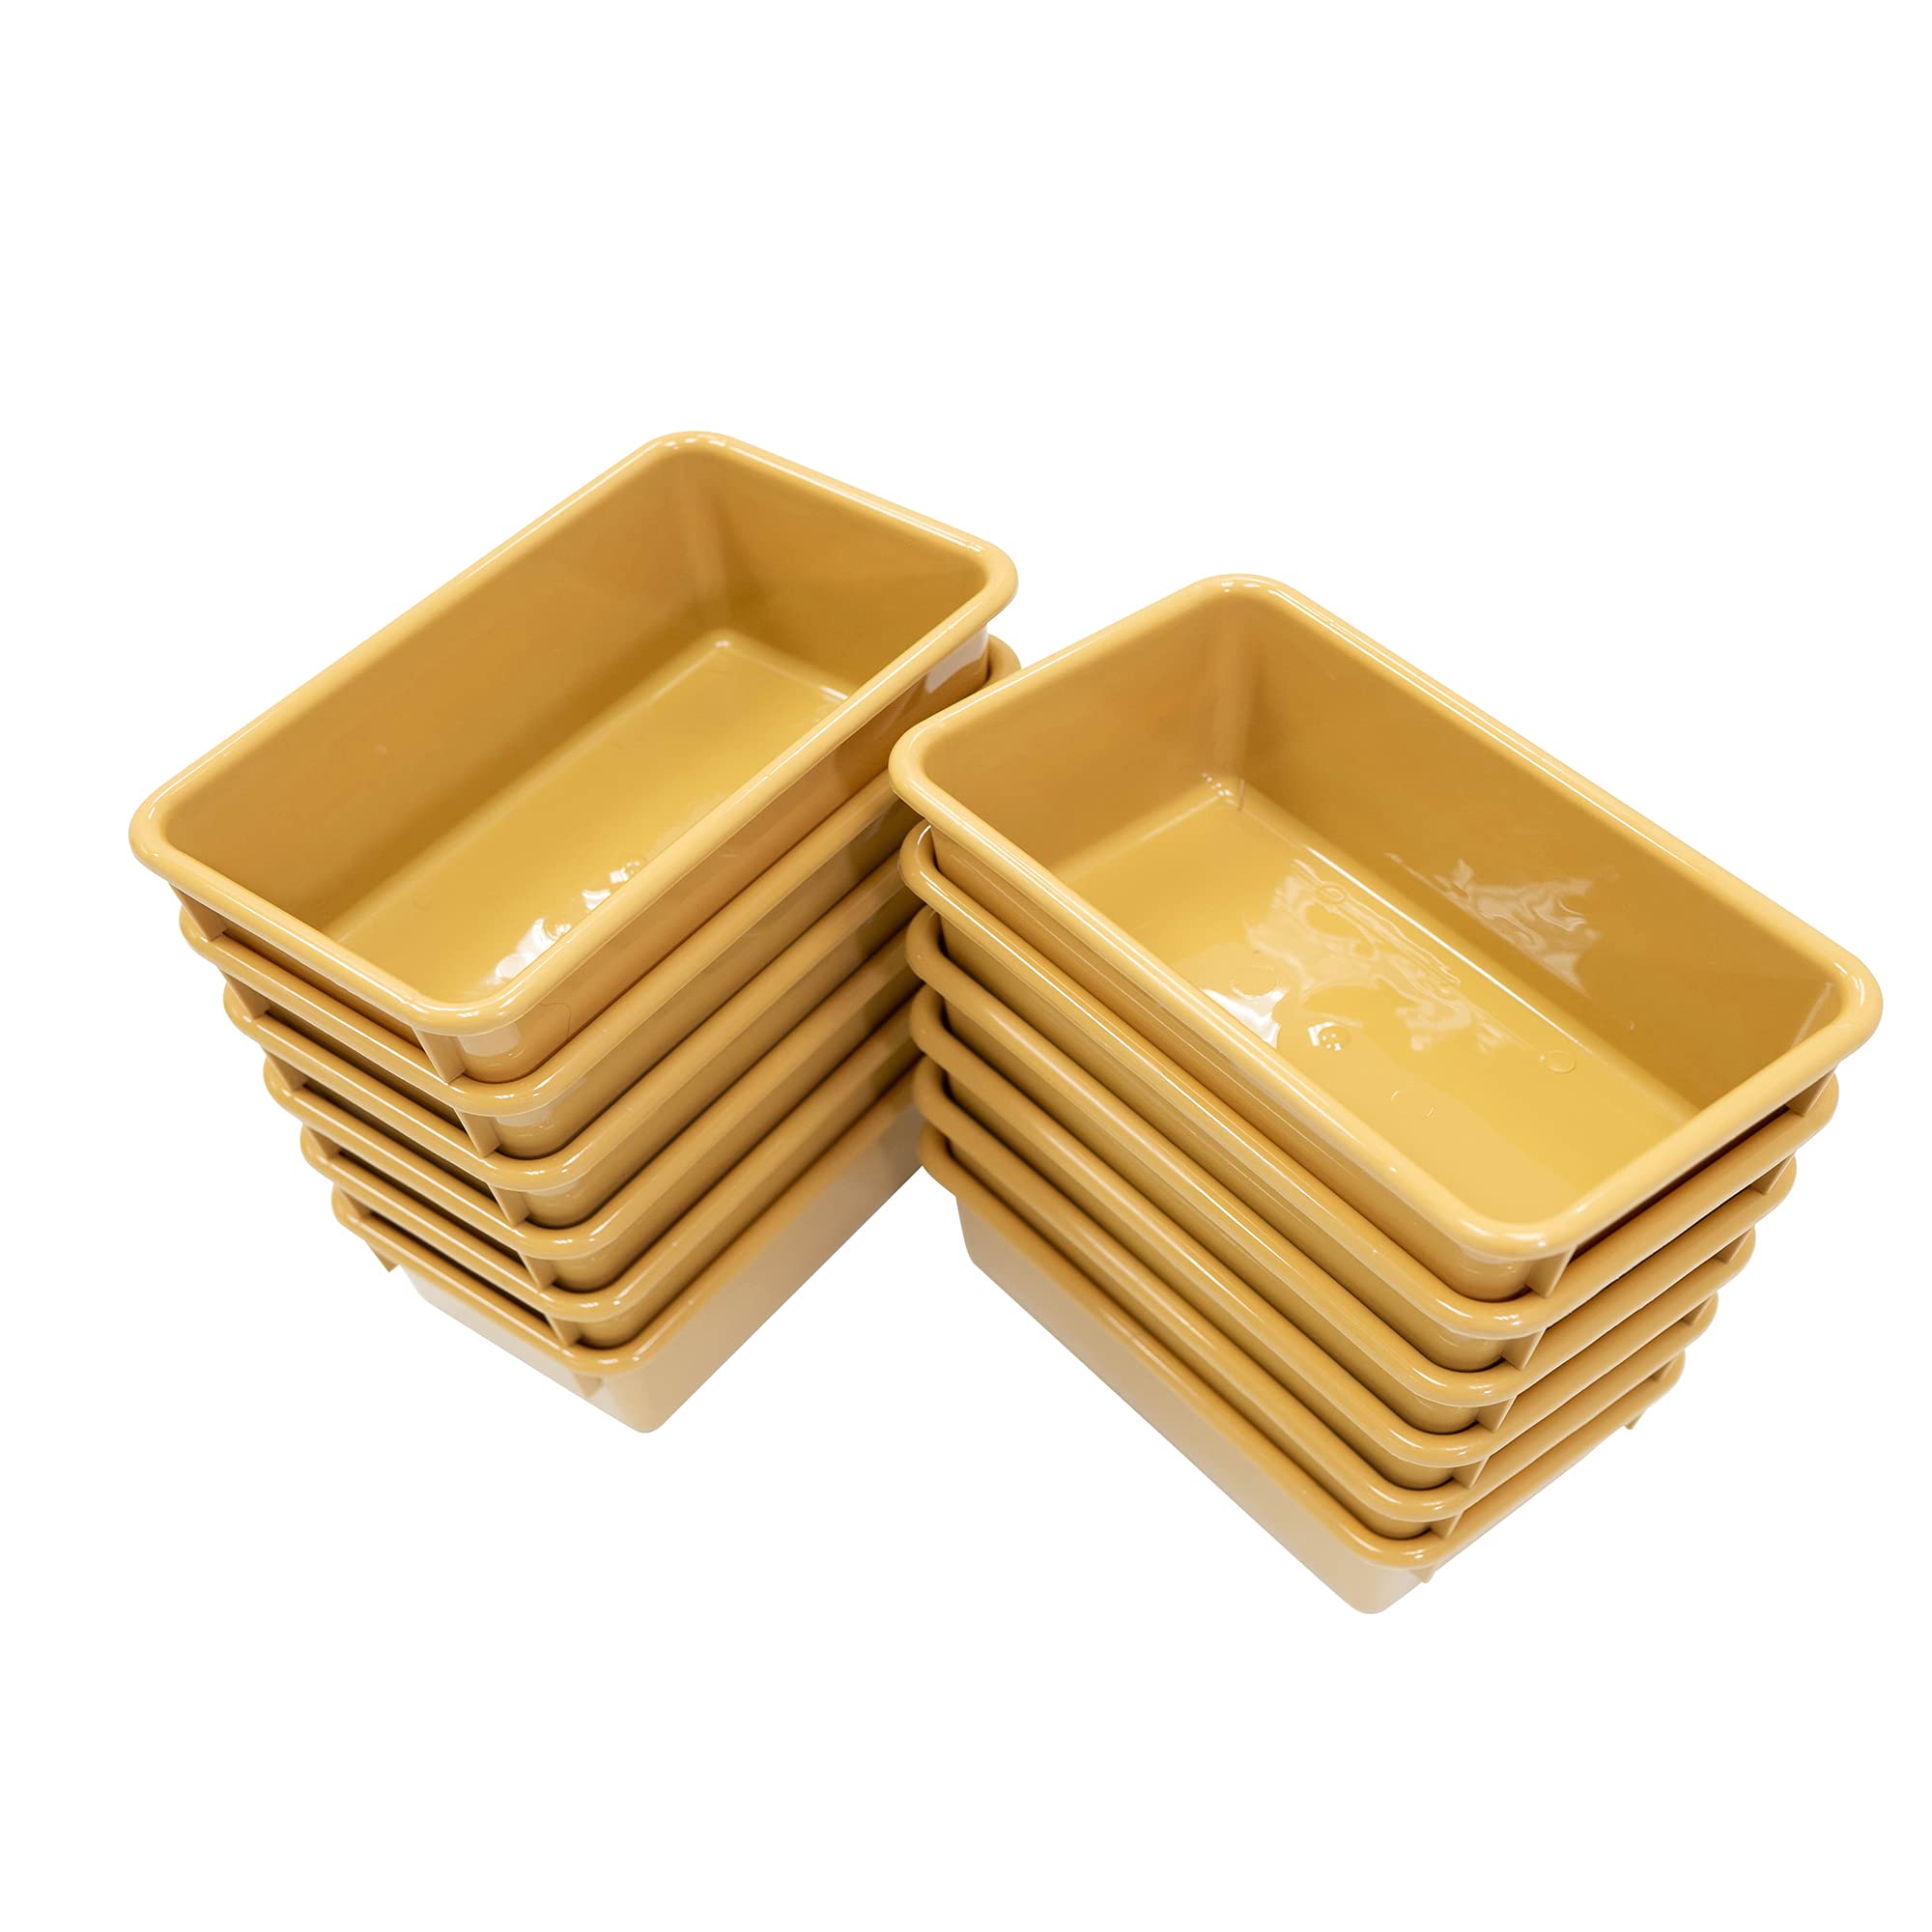 Angeles Value Line Cubby Storage Trays, Set-12 Tan, ANG7052T12, Nursery or Classroom Décor, Preschool or Daycare Plastic Bins for Kids Shelving Units